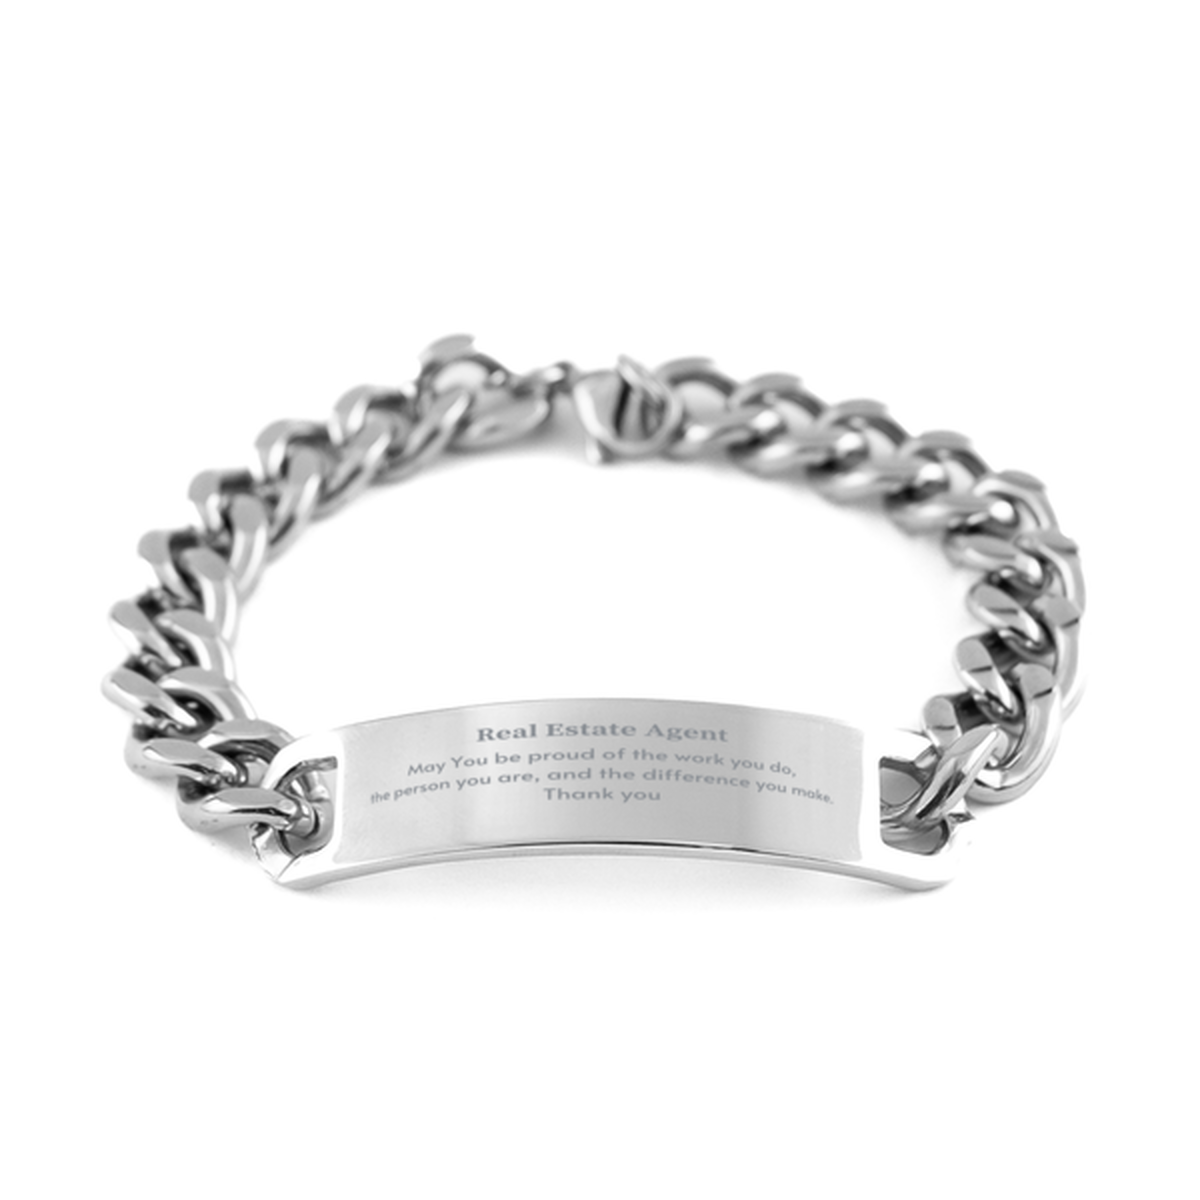 Heartwarming Cuban Chain Stainless Steel Bracelet Retirement Coworkers Gifts for Real Estate Agent, Real Estate Agent May You be proud of the work you do, the person you are Gifts for Boss Men Women Friends